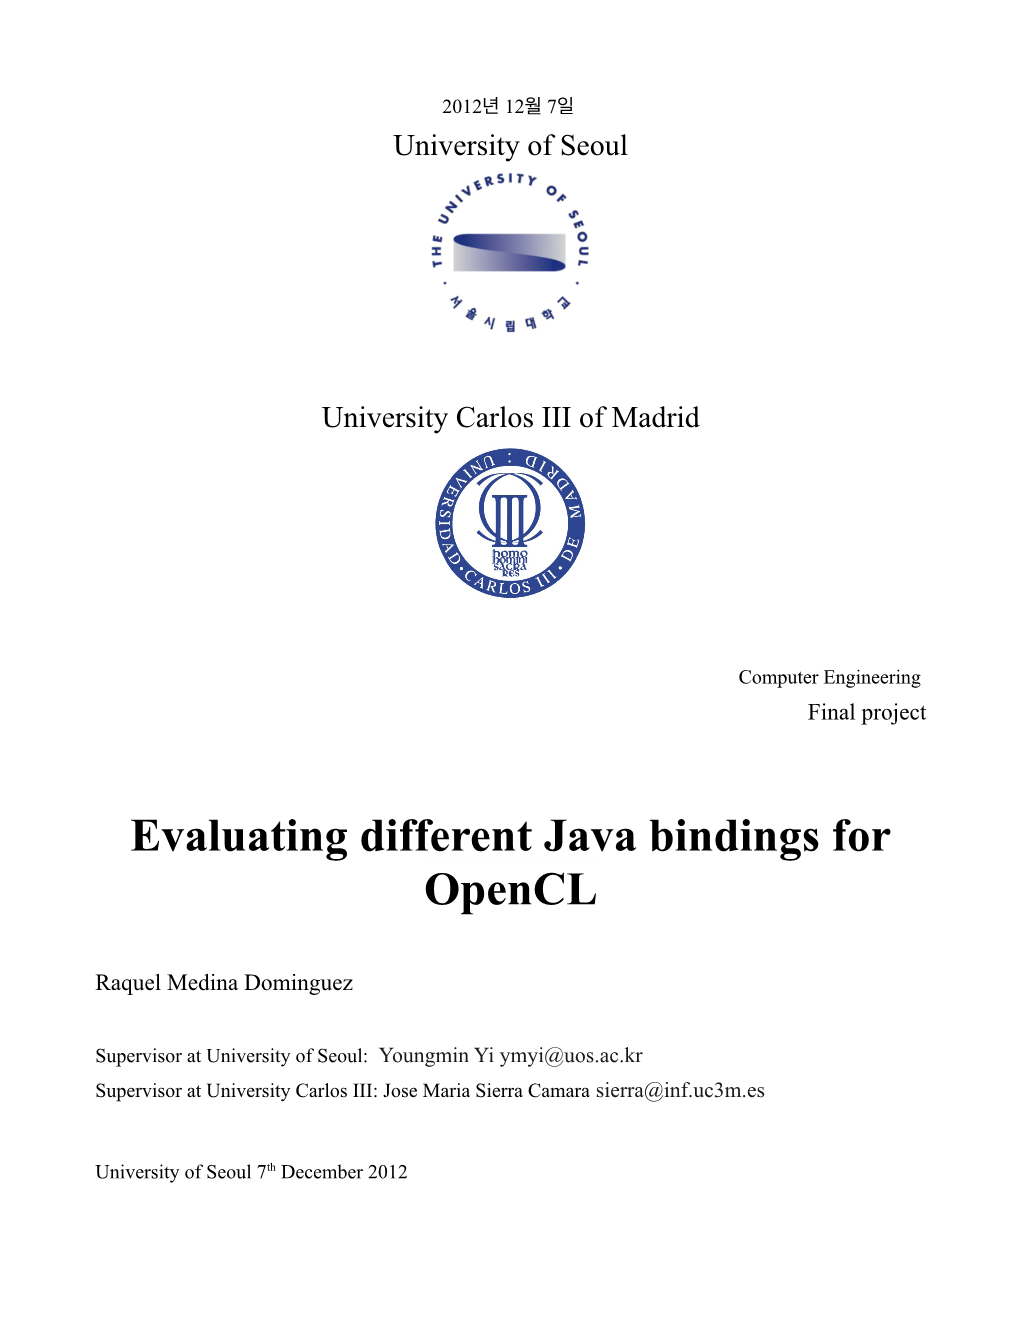 Evaluating Different Java Bindings for Opencl